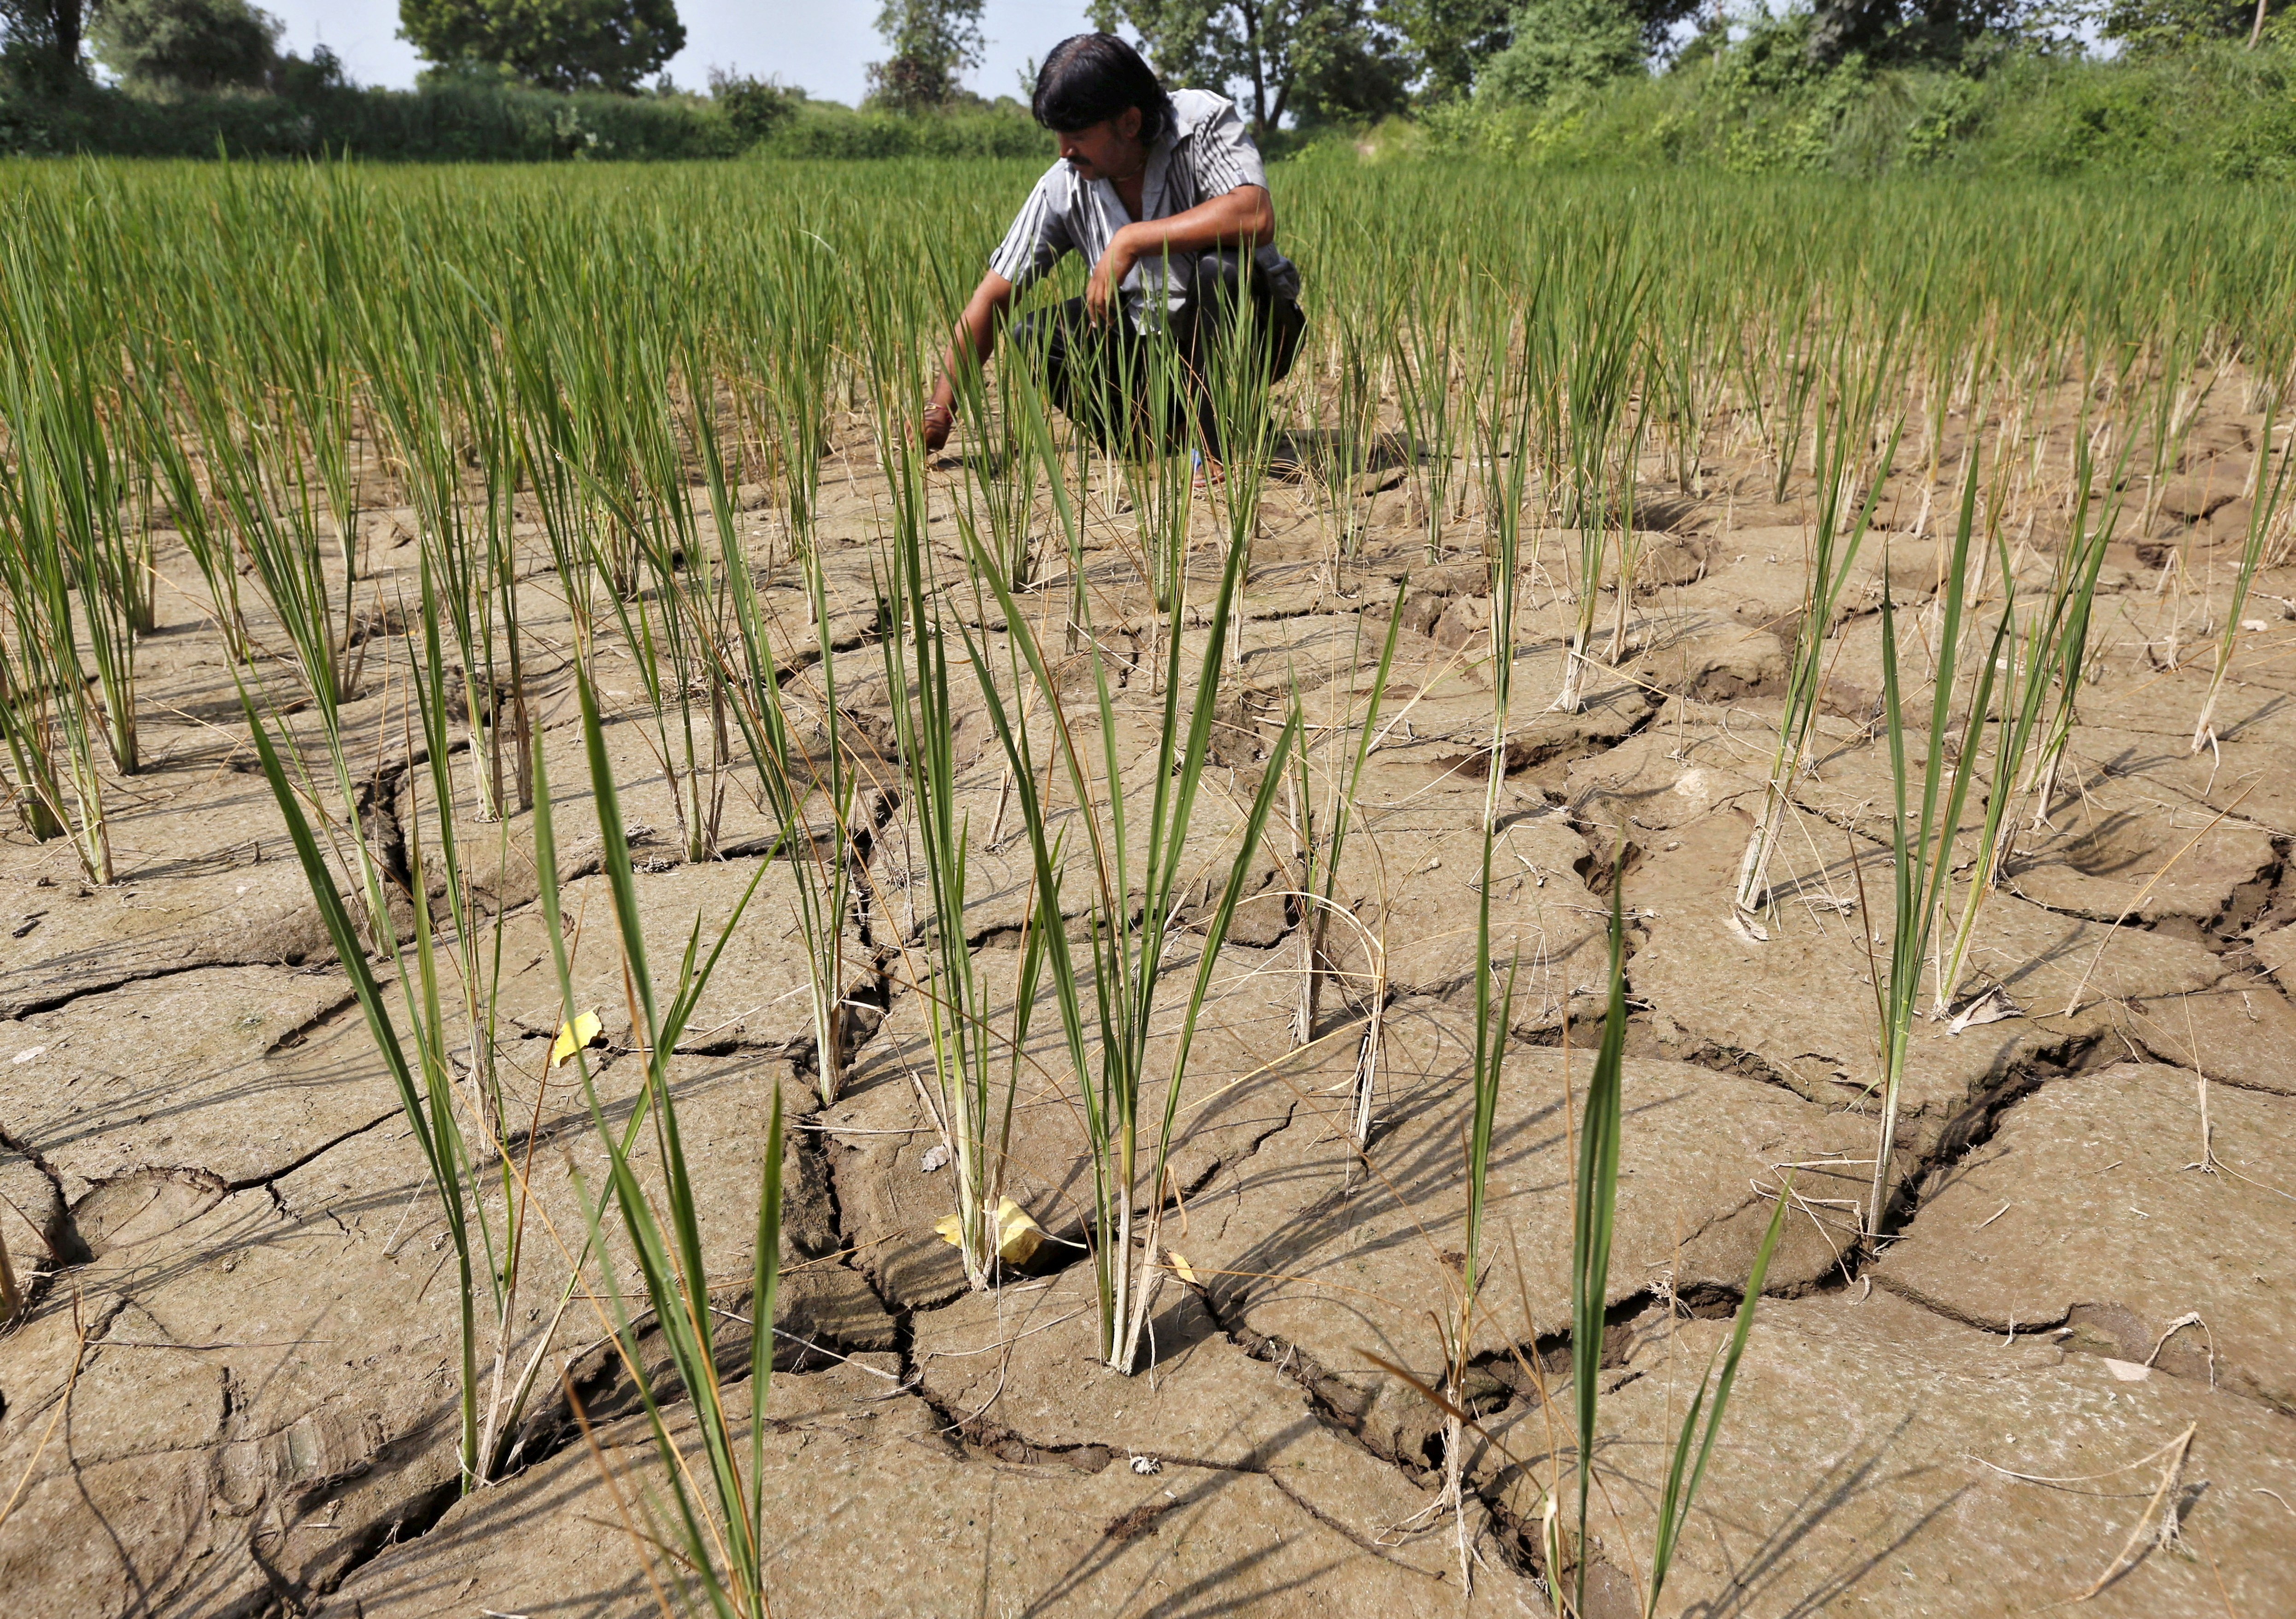 EXPLAINER-Why El Nino is a concern for Indian monsoon rains?